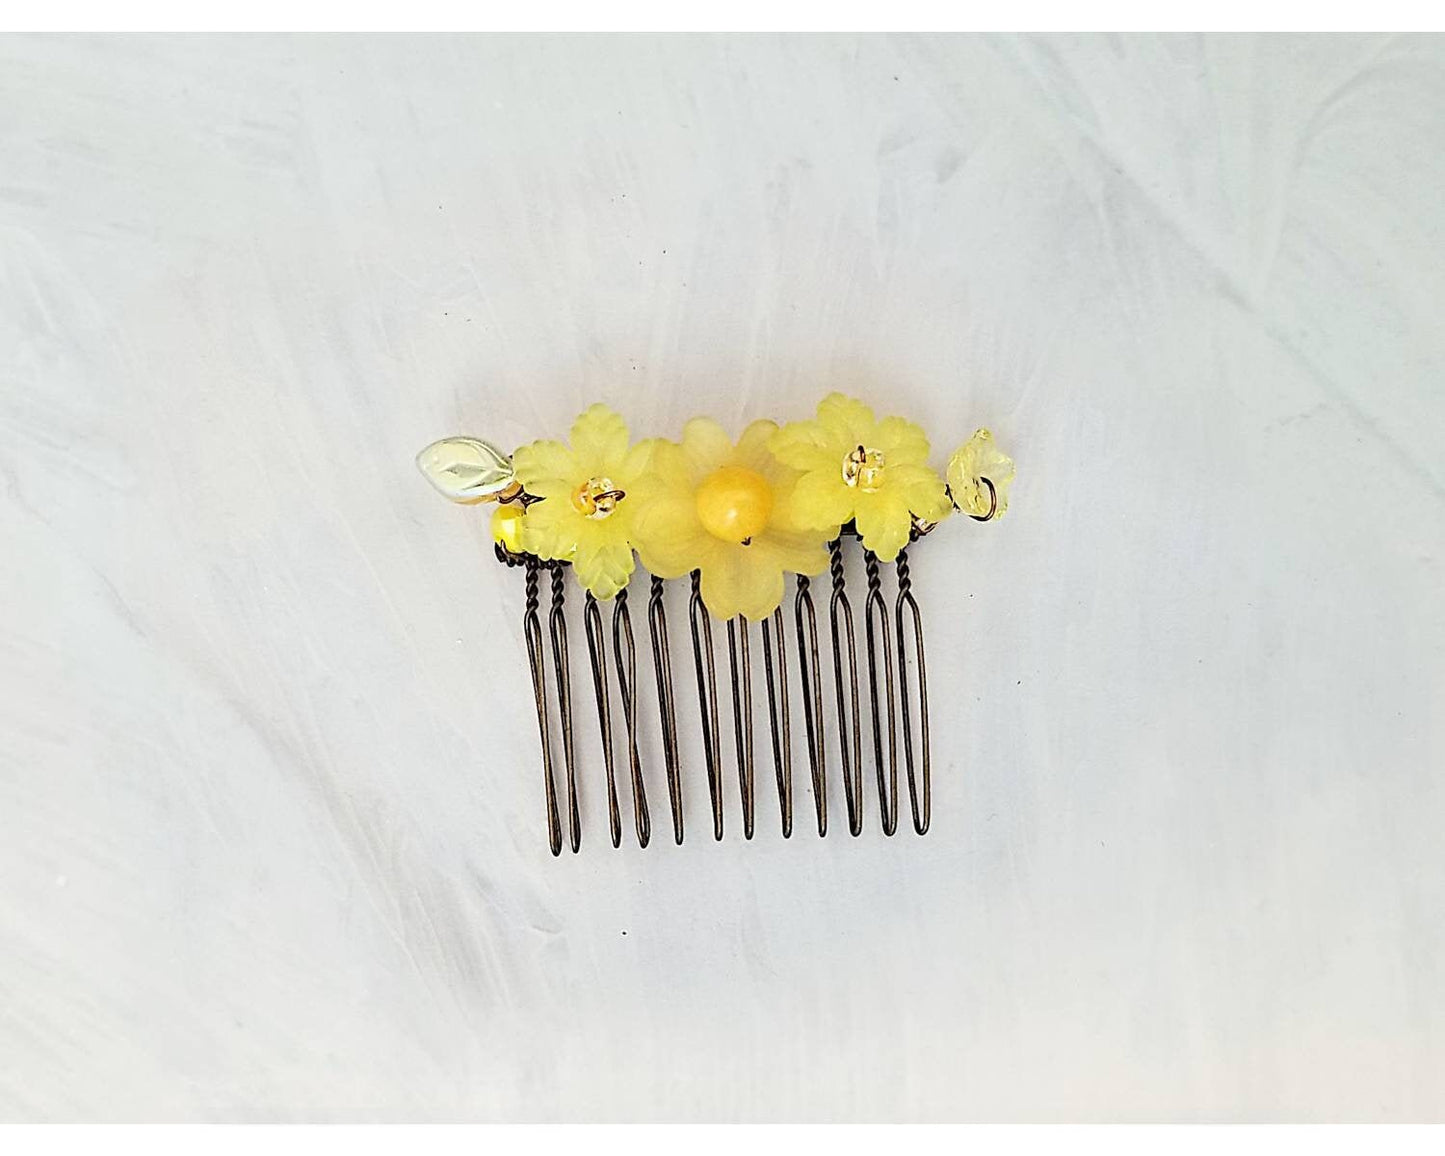 Wire Wrapped Lucite Flower Comb in Yellow, Bridesmaid, Wedding, Floral, Garden, Party, Boho, Bohemian, Choice of Colors and Metals